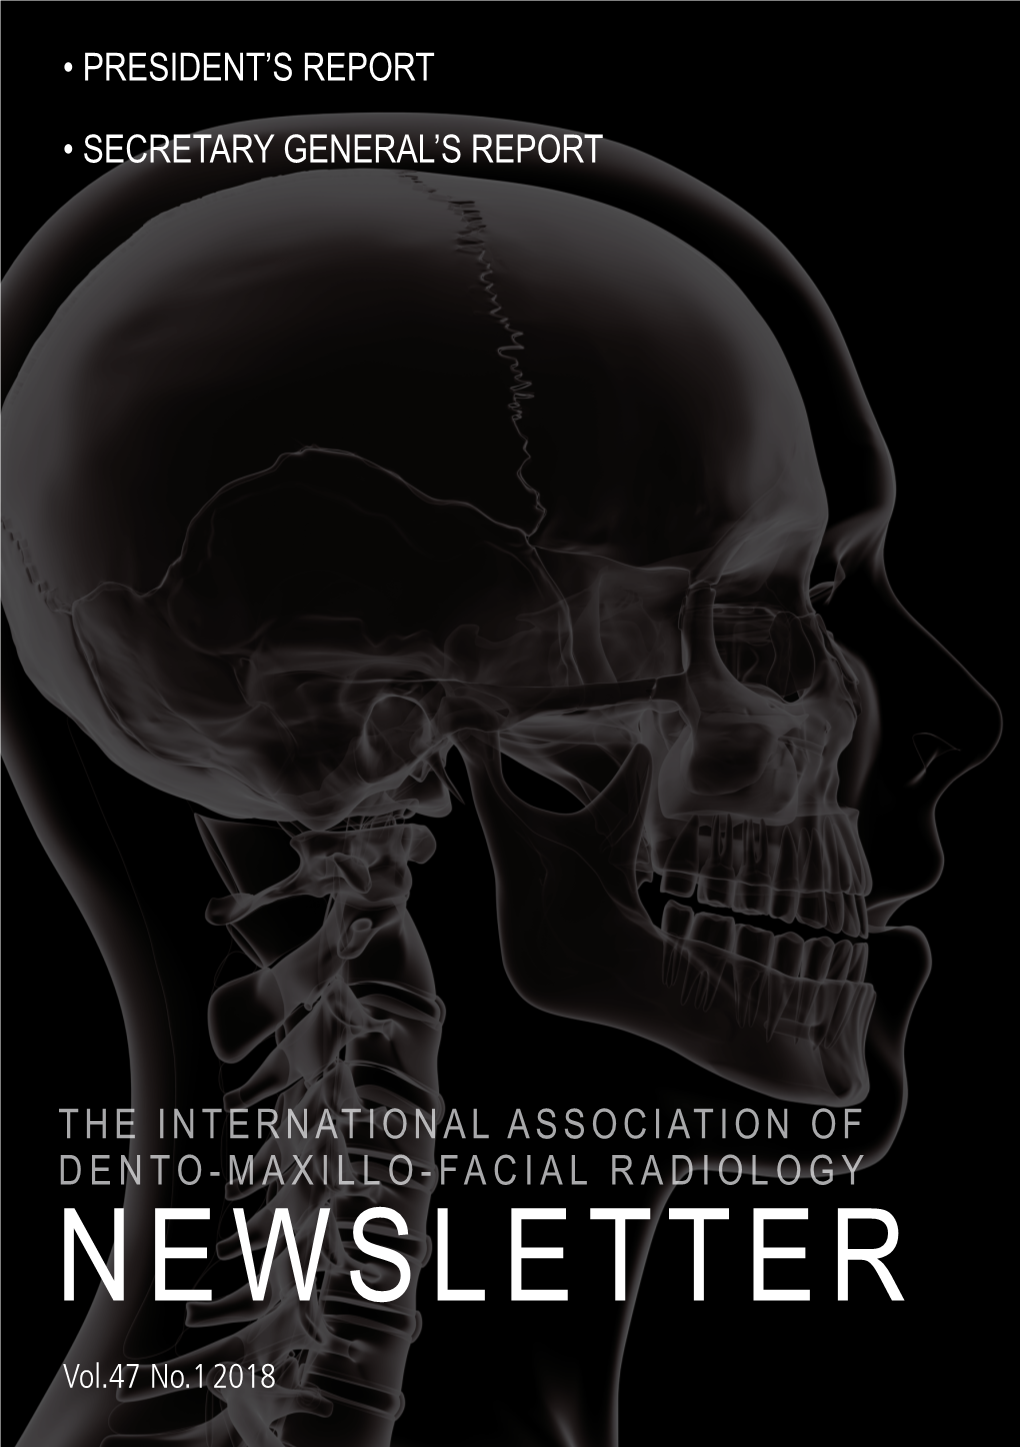 NEWSLETTER Vol.47 No.1 2018 Submit to DMFR Publishing the Very Best Research in Dental, Oral and Maxillofacial Radiology